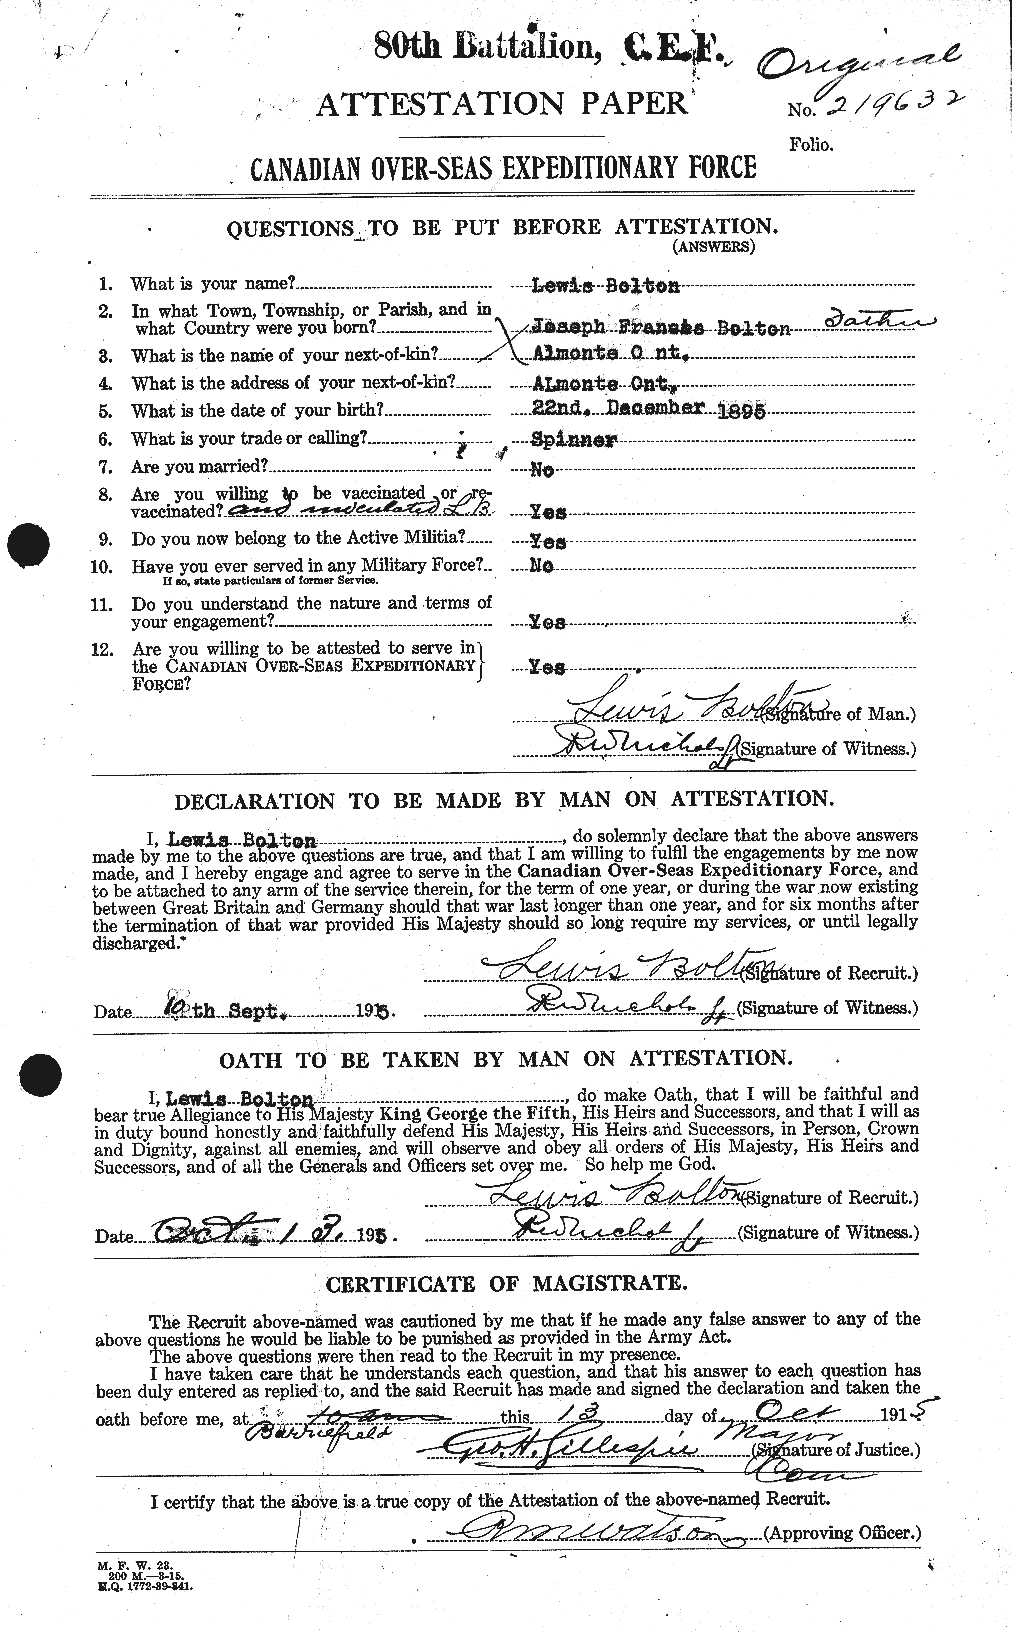 Personnel Records of the First World War - CEF 250092a